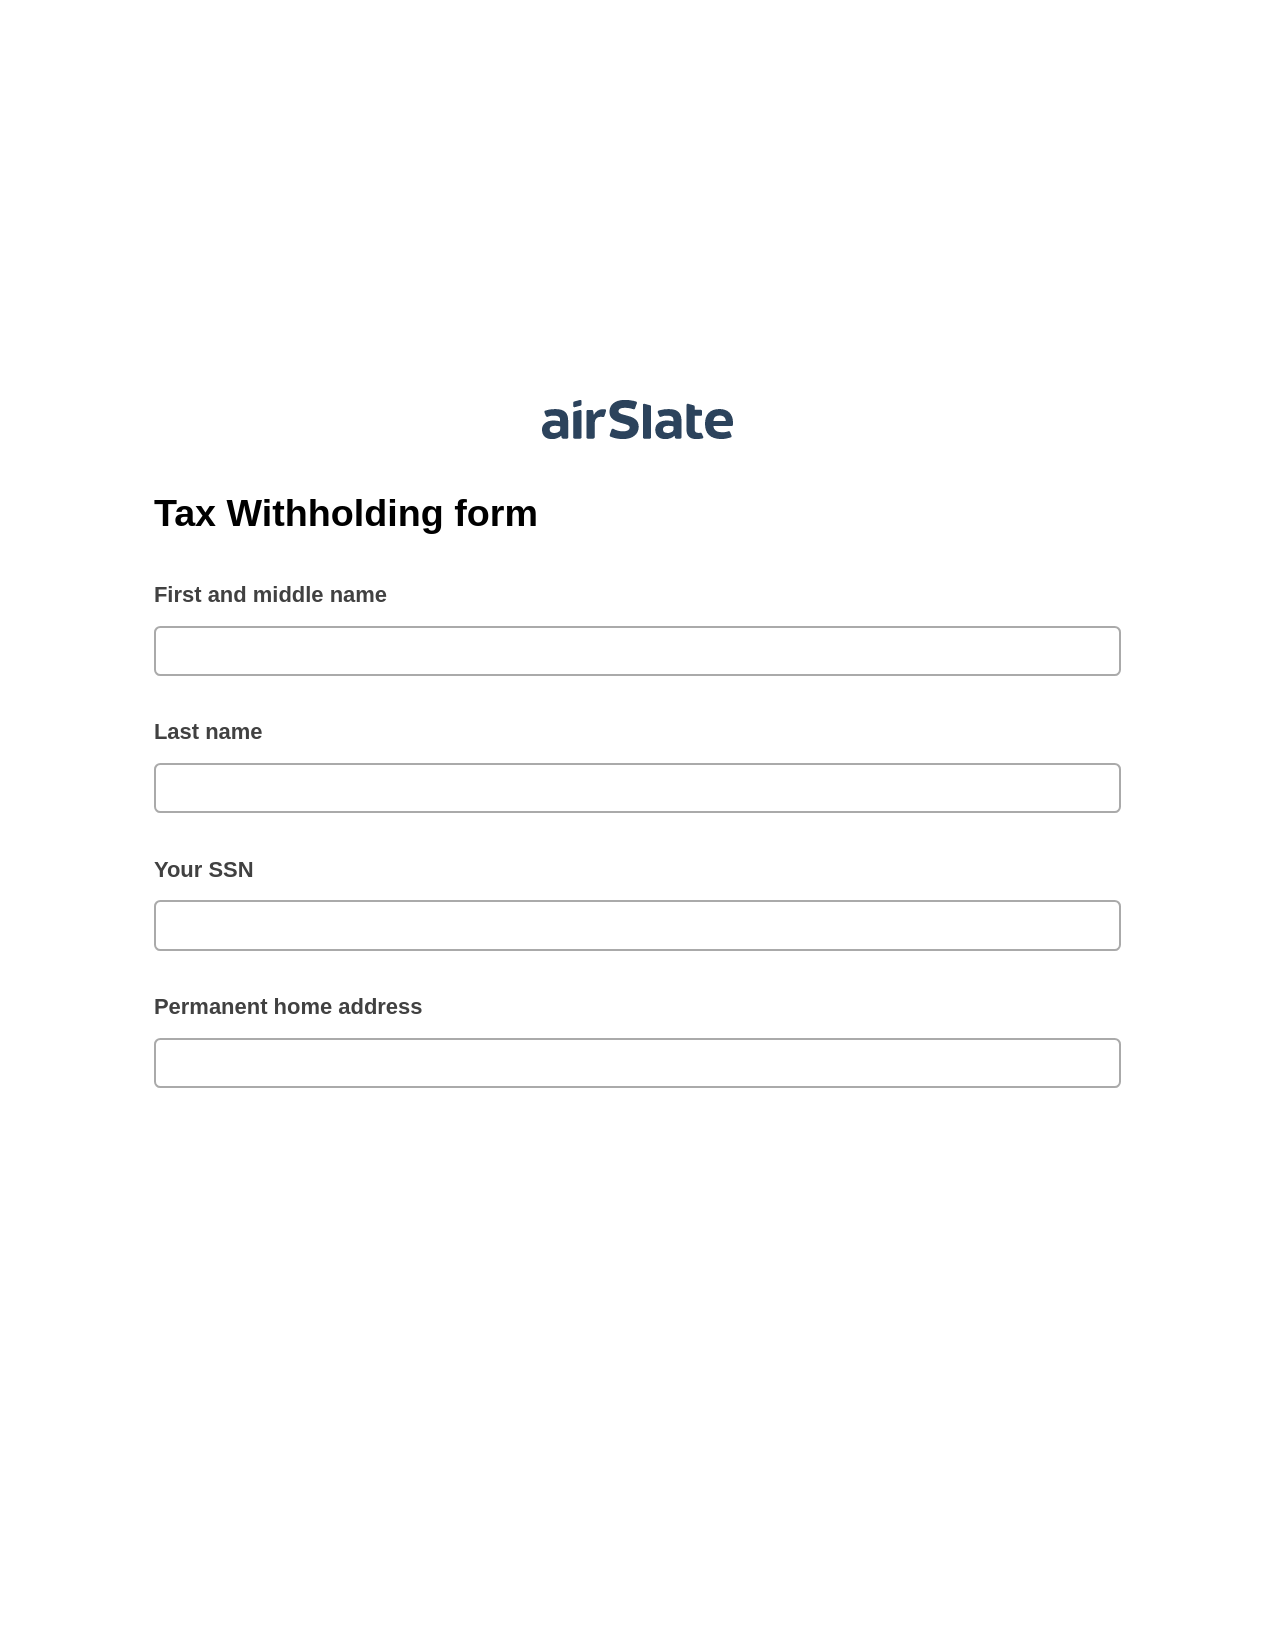 Multirole Tax Withholding form Pre-fill from NetSuite Records Bot, Webhook Bot, Export to Formstack Documents Bot